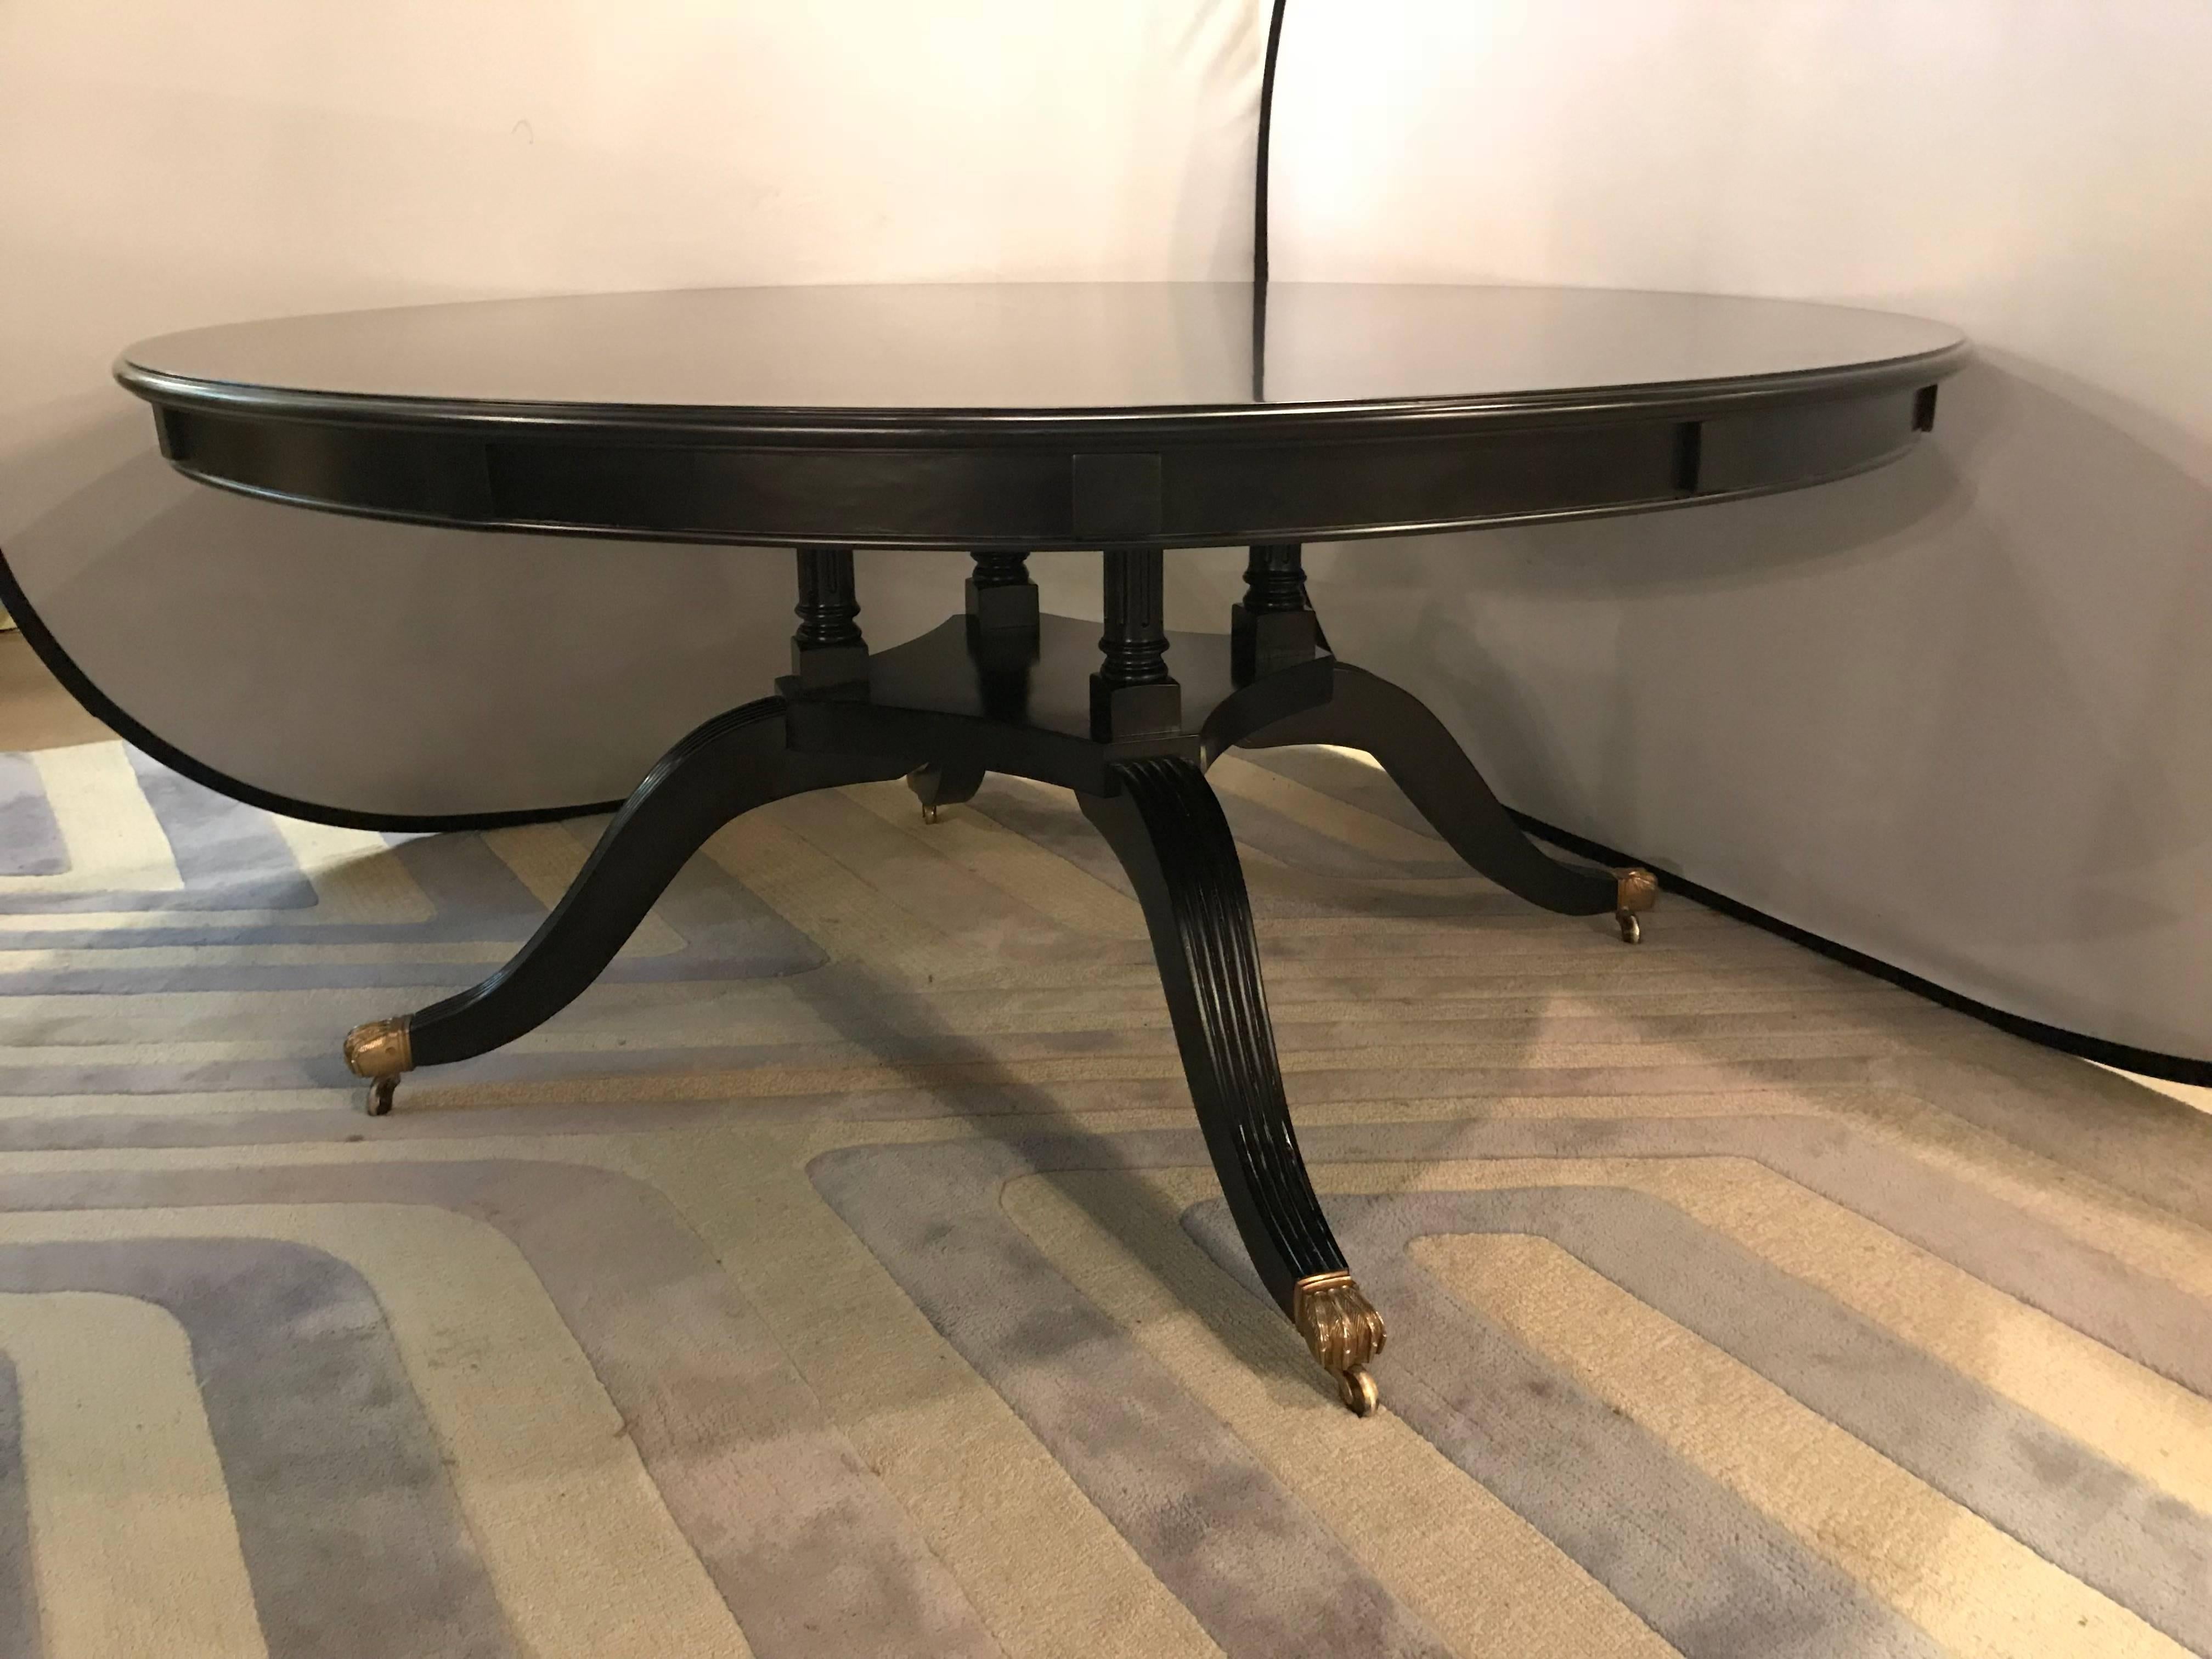 Monumental Hollywood Regency Style custom-made ebony circular extending dining table. This finely crafted one of a kind dining table comes with six twelve inch leaves which extends the 65 inch circular dining table into a palatial eighty-nine inches